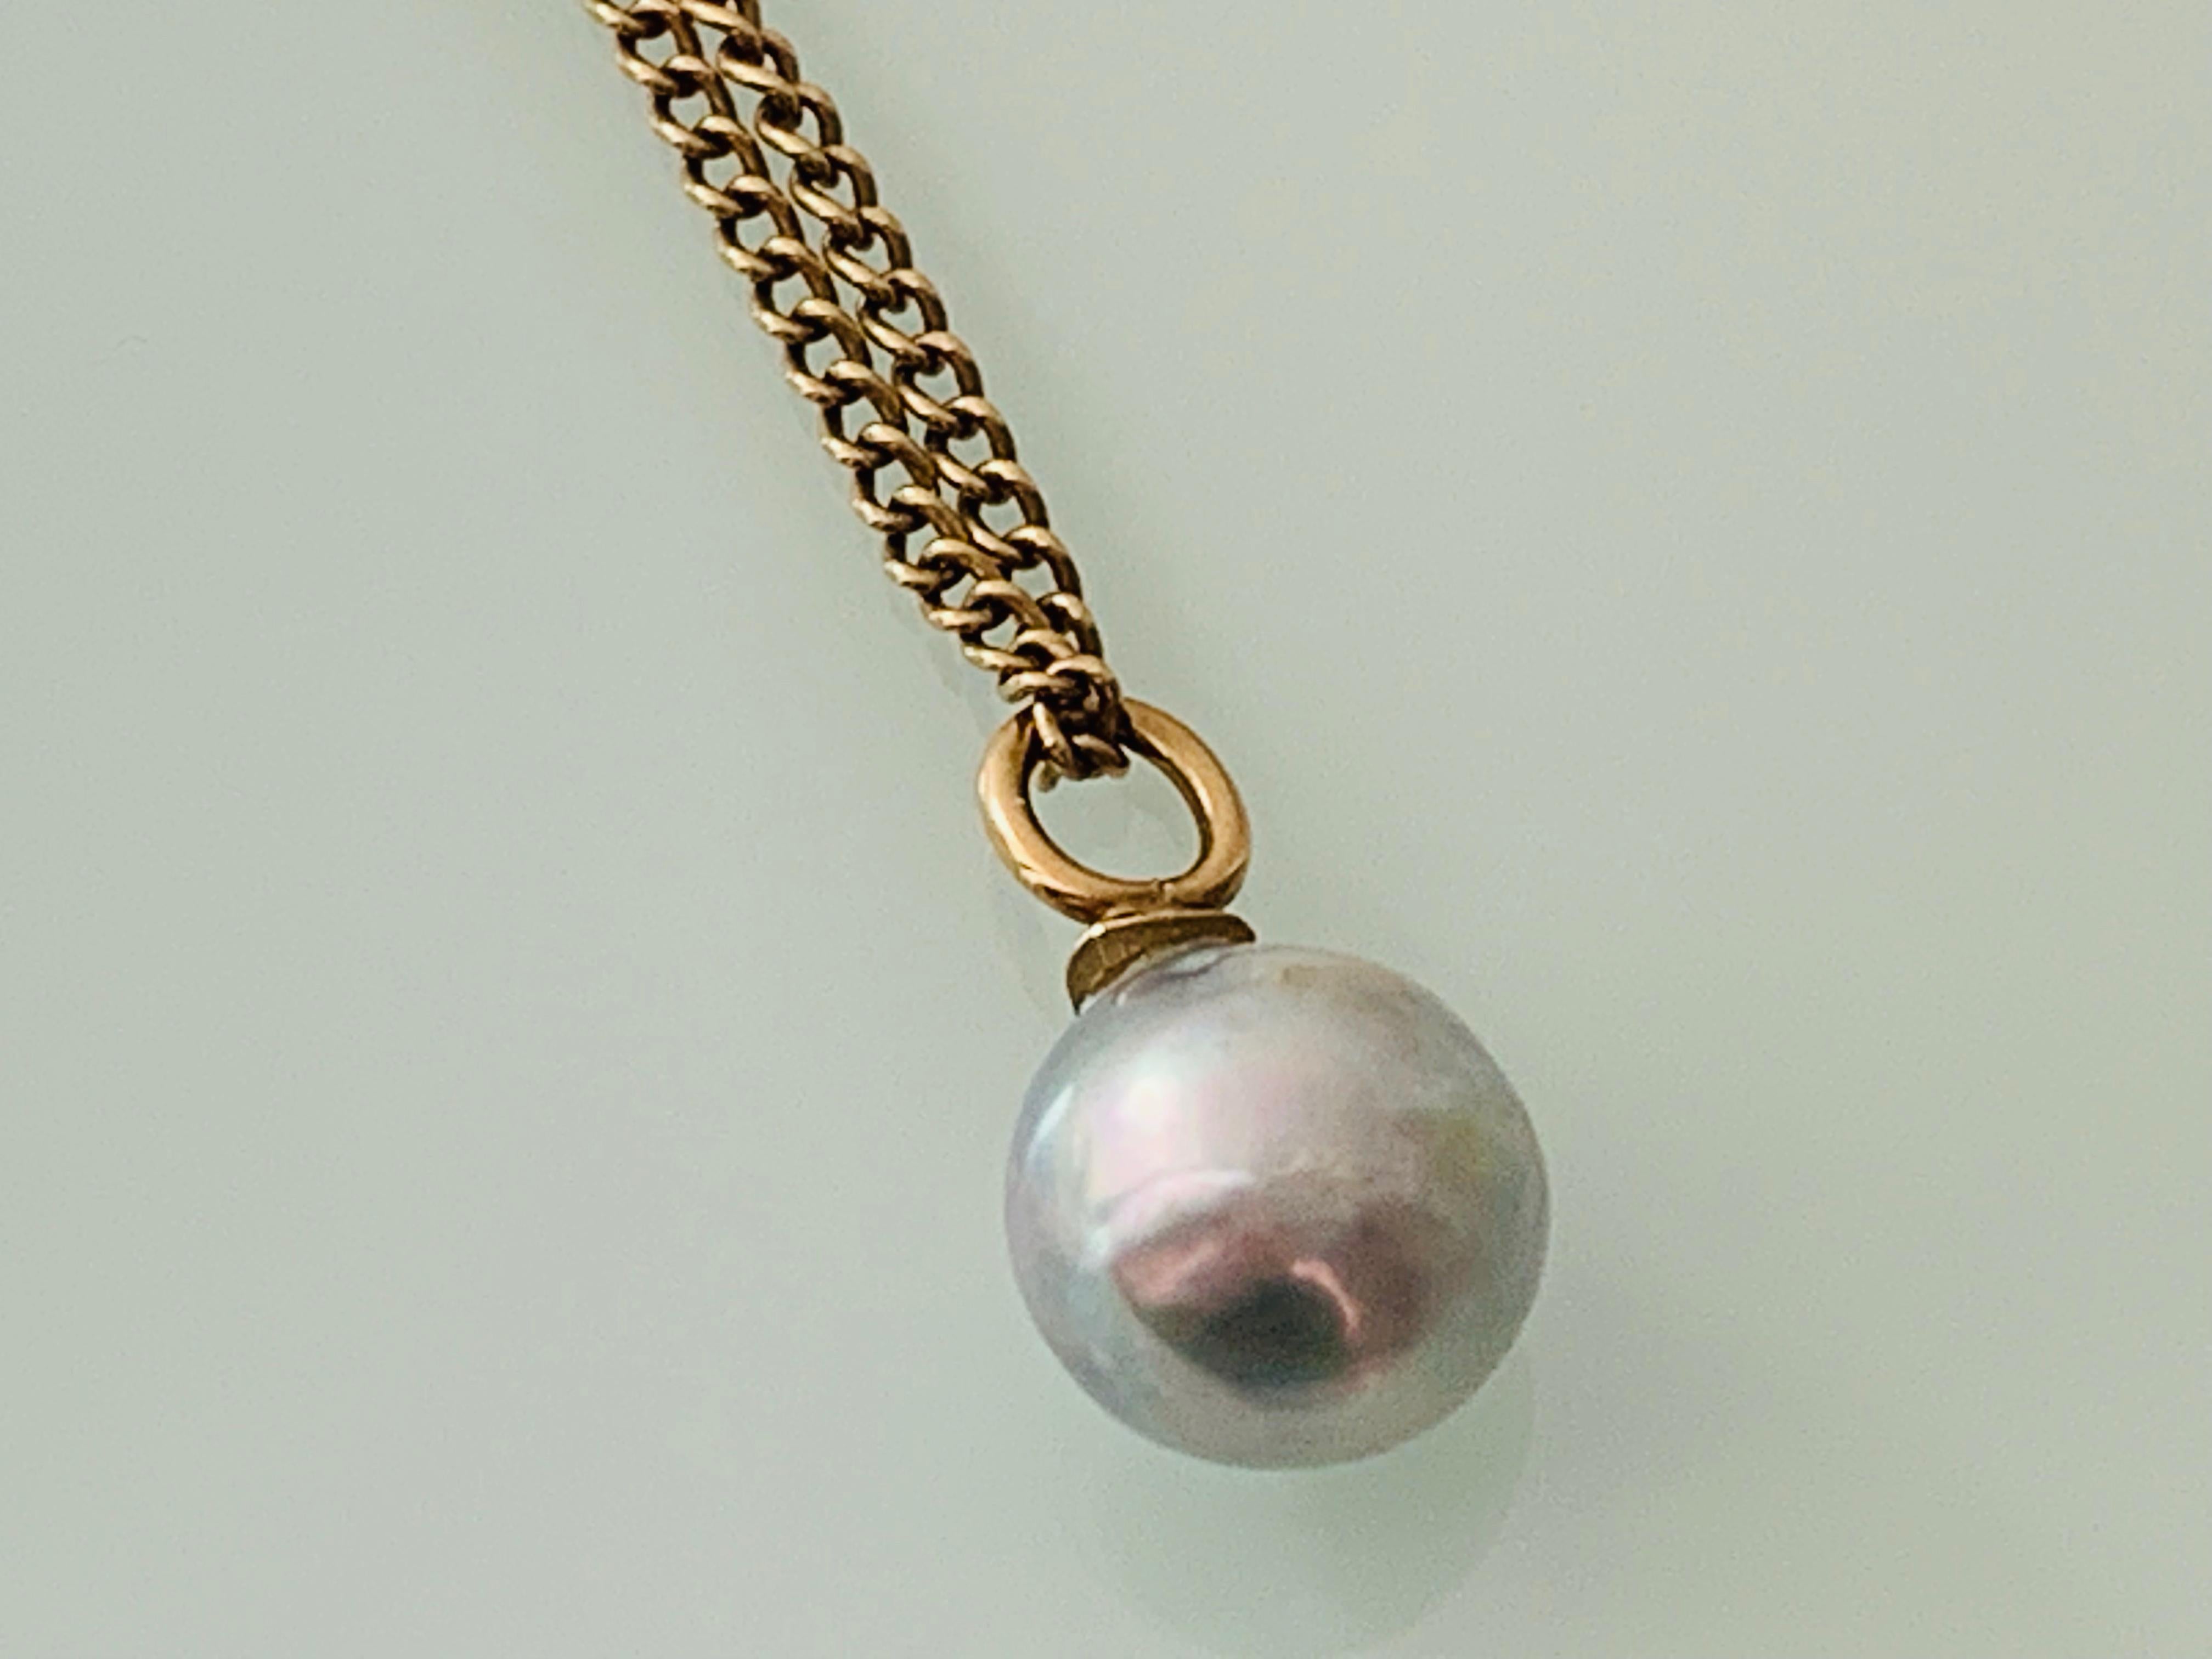 Antique Baby Blue Baroque Wild Natural Pearl 
on a 9ct Gold Bail - 
Hung on a 9ct Antique Gold 19